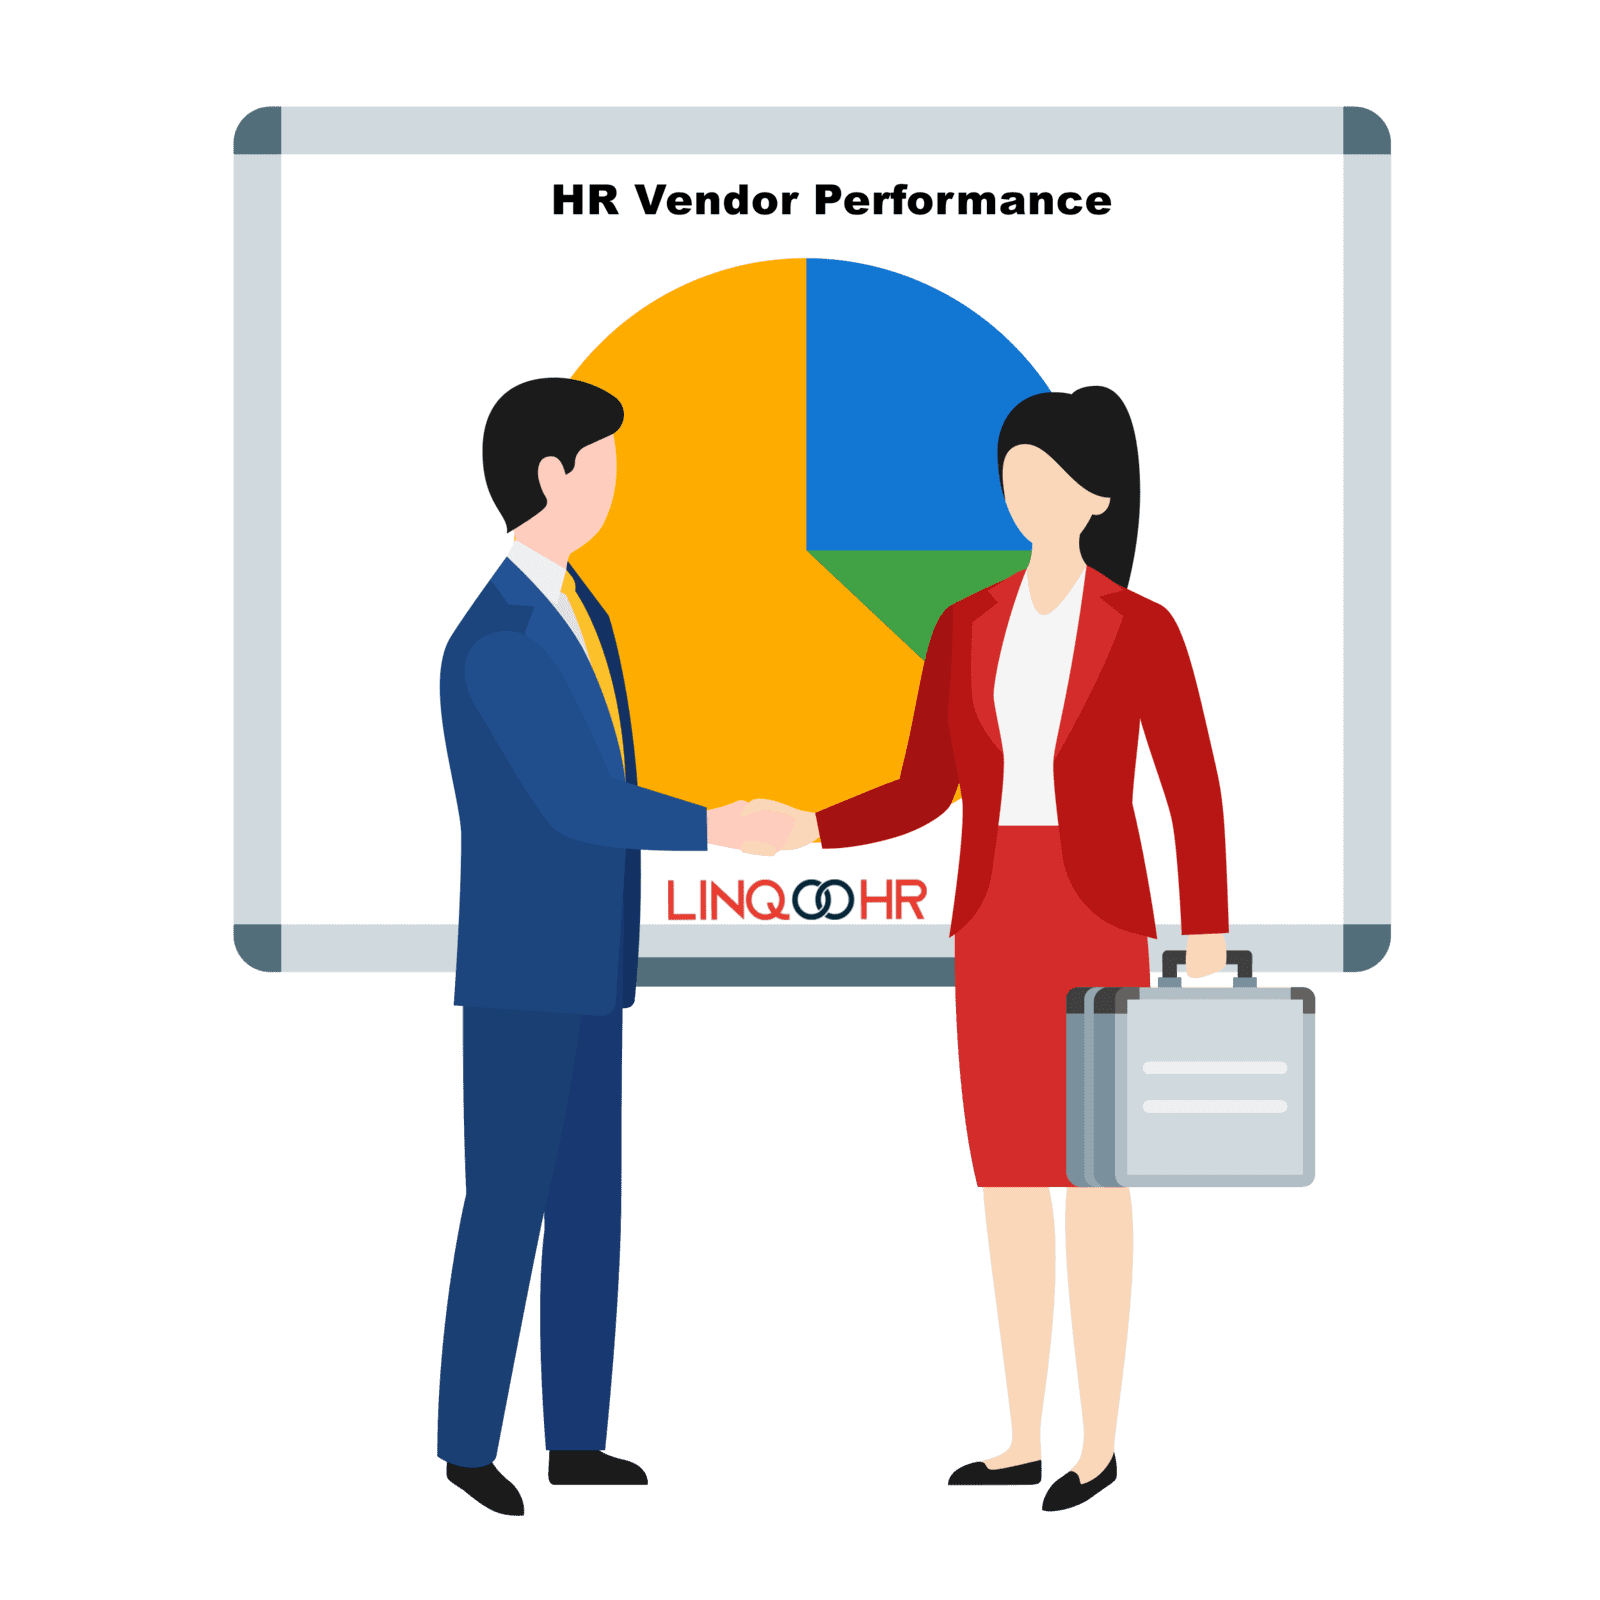 Top 3 Challenges Faced by HR Teams When Sourcing New Vendors